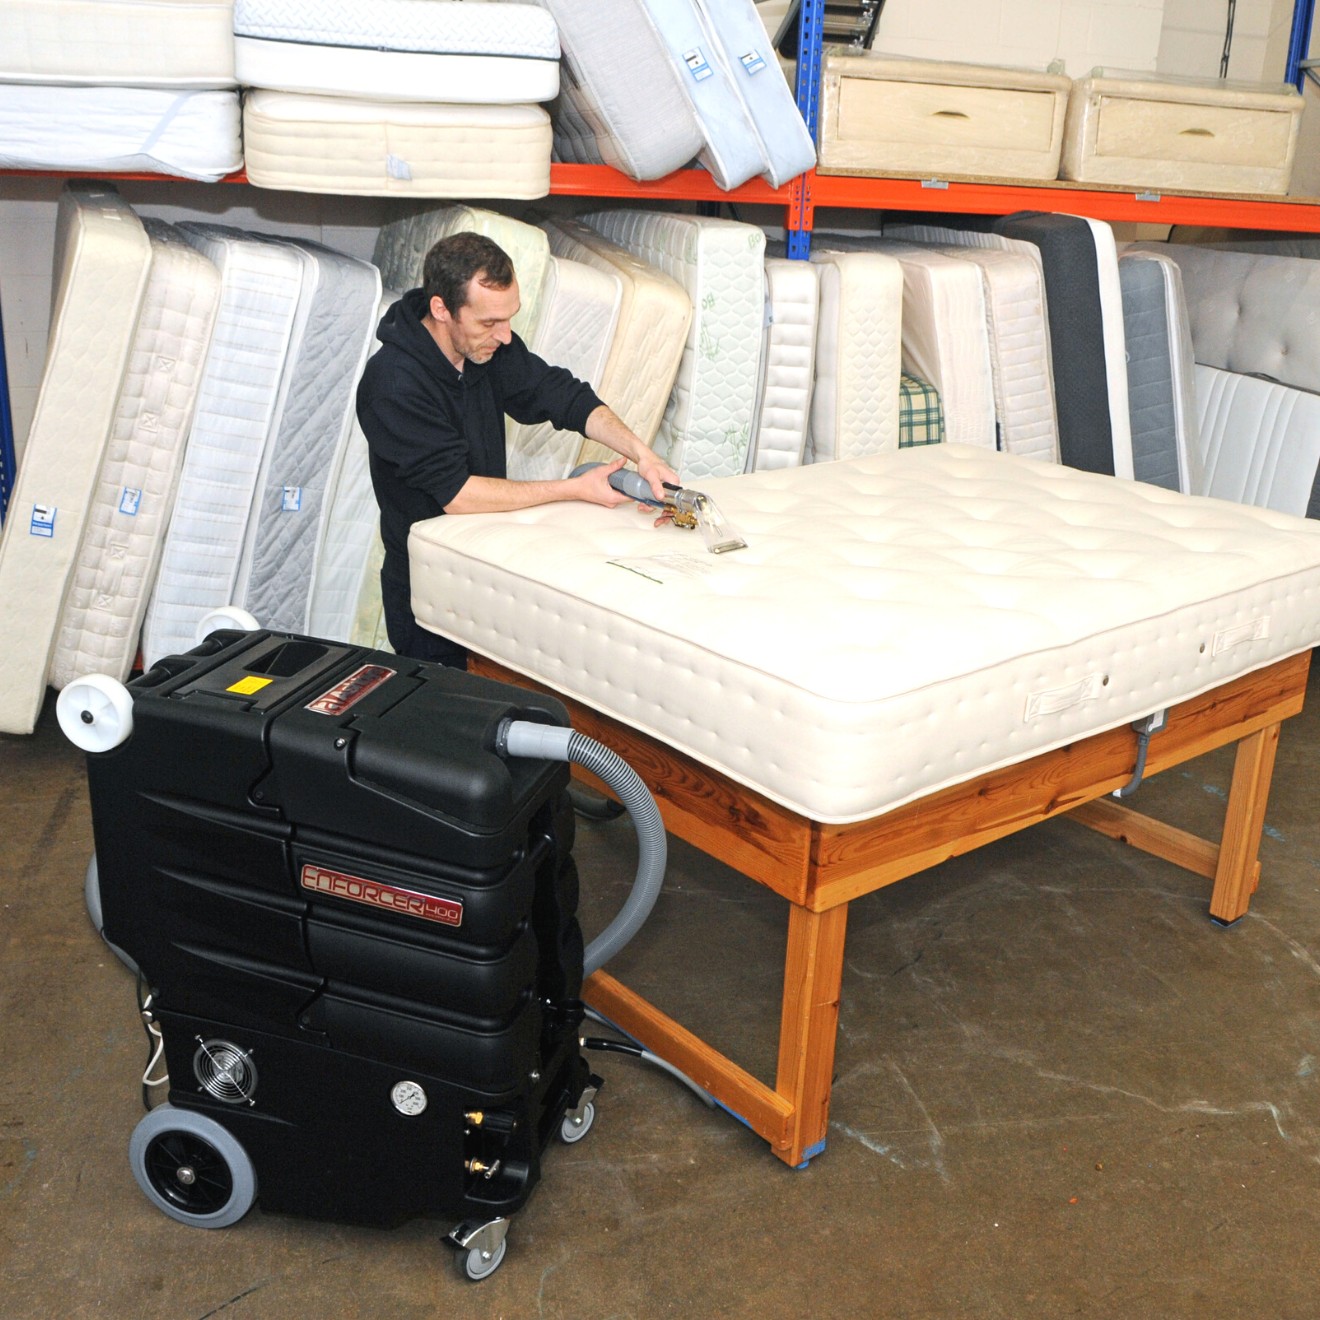 Reusable mattress being professionally cleaned